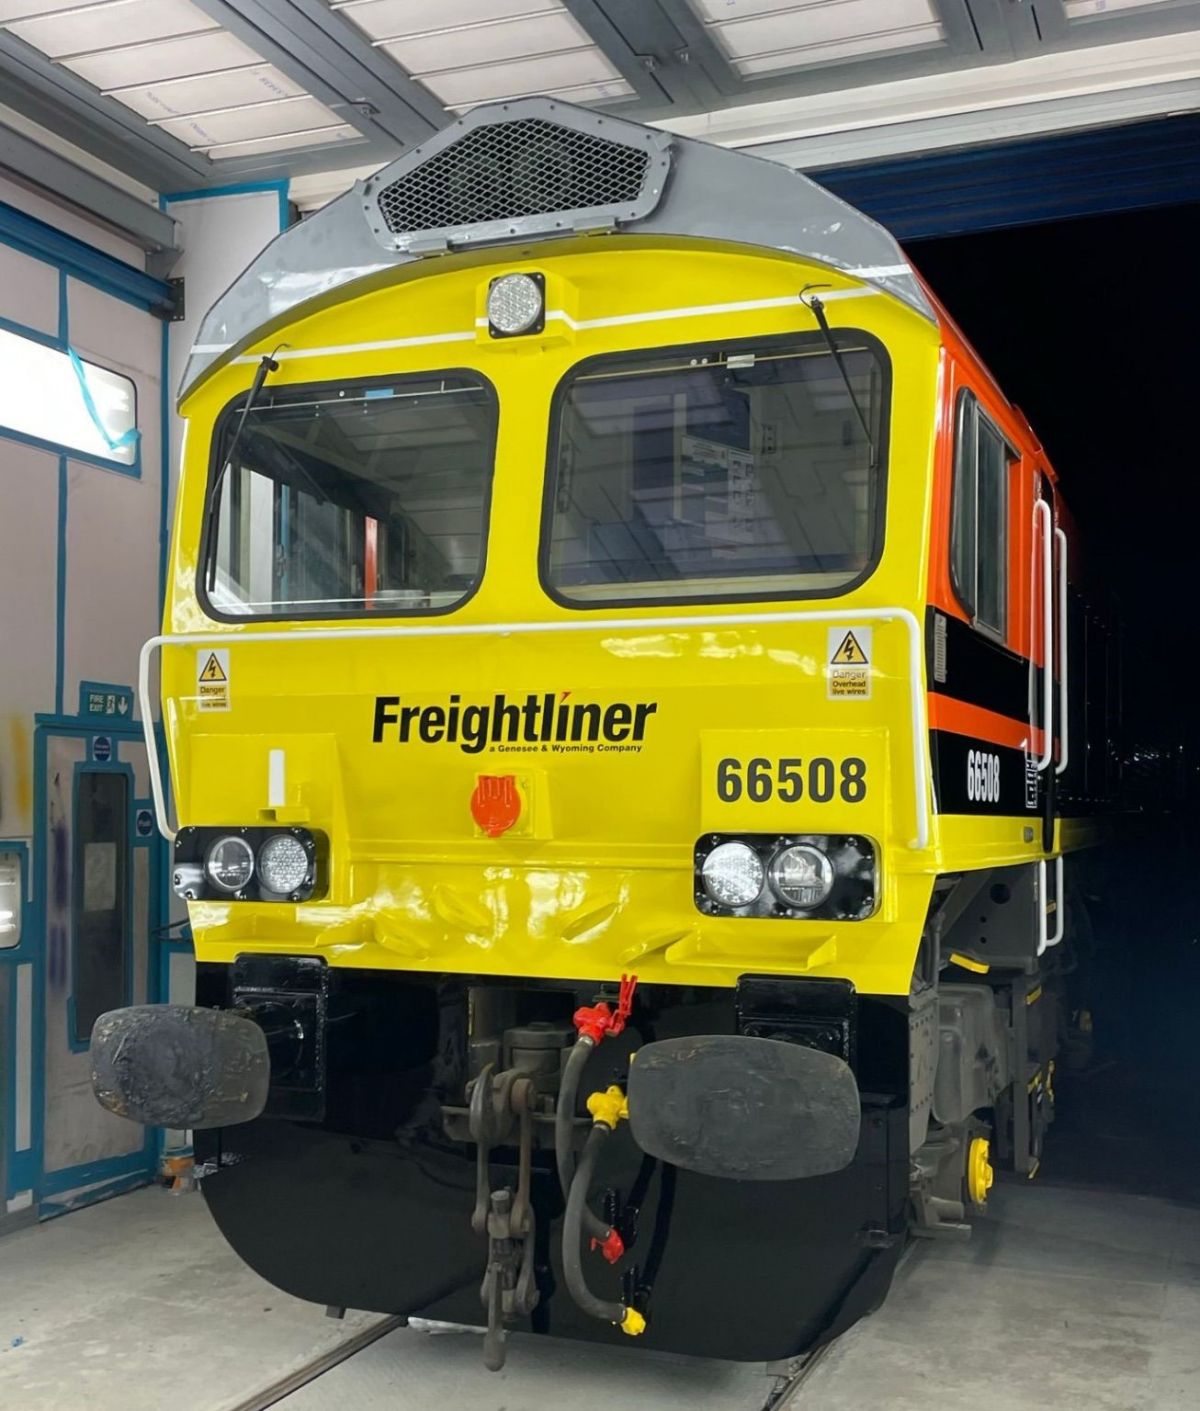 Freightliner Repaint and Re-livery